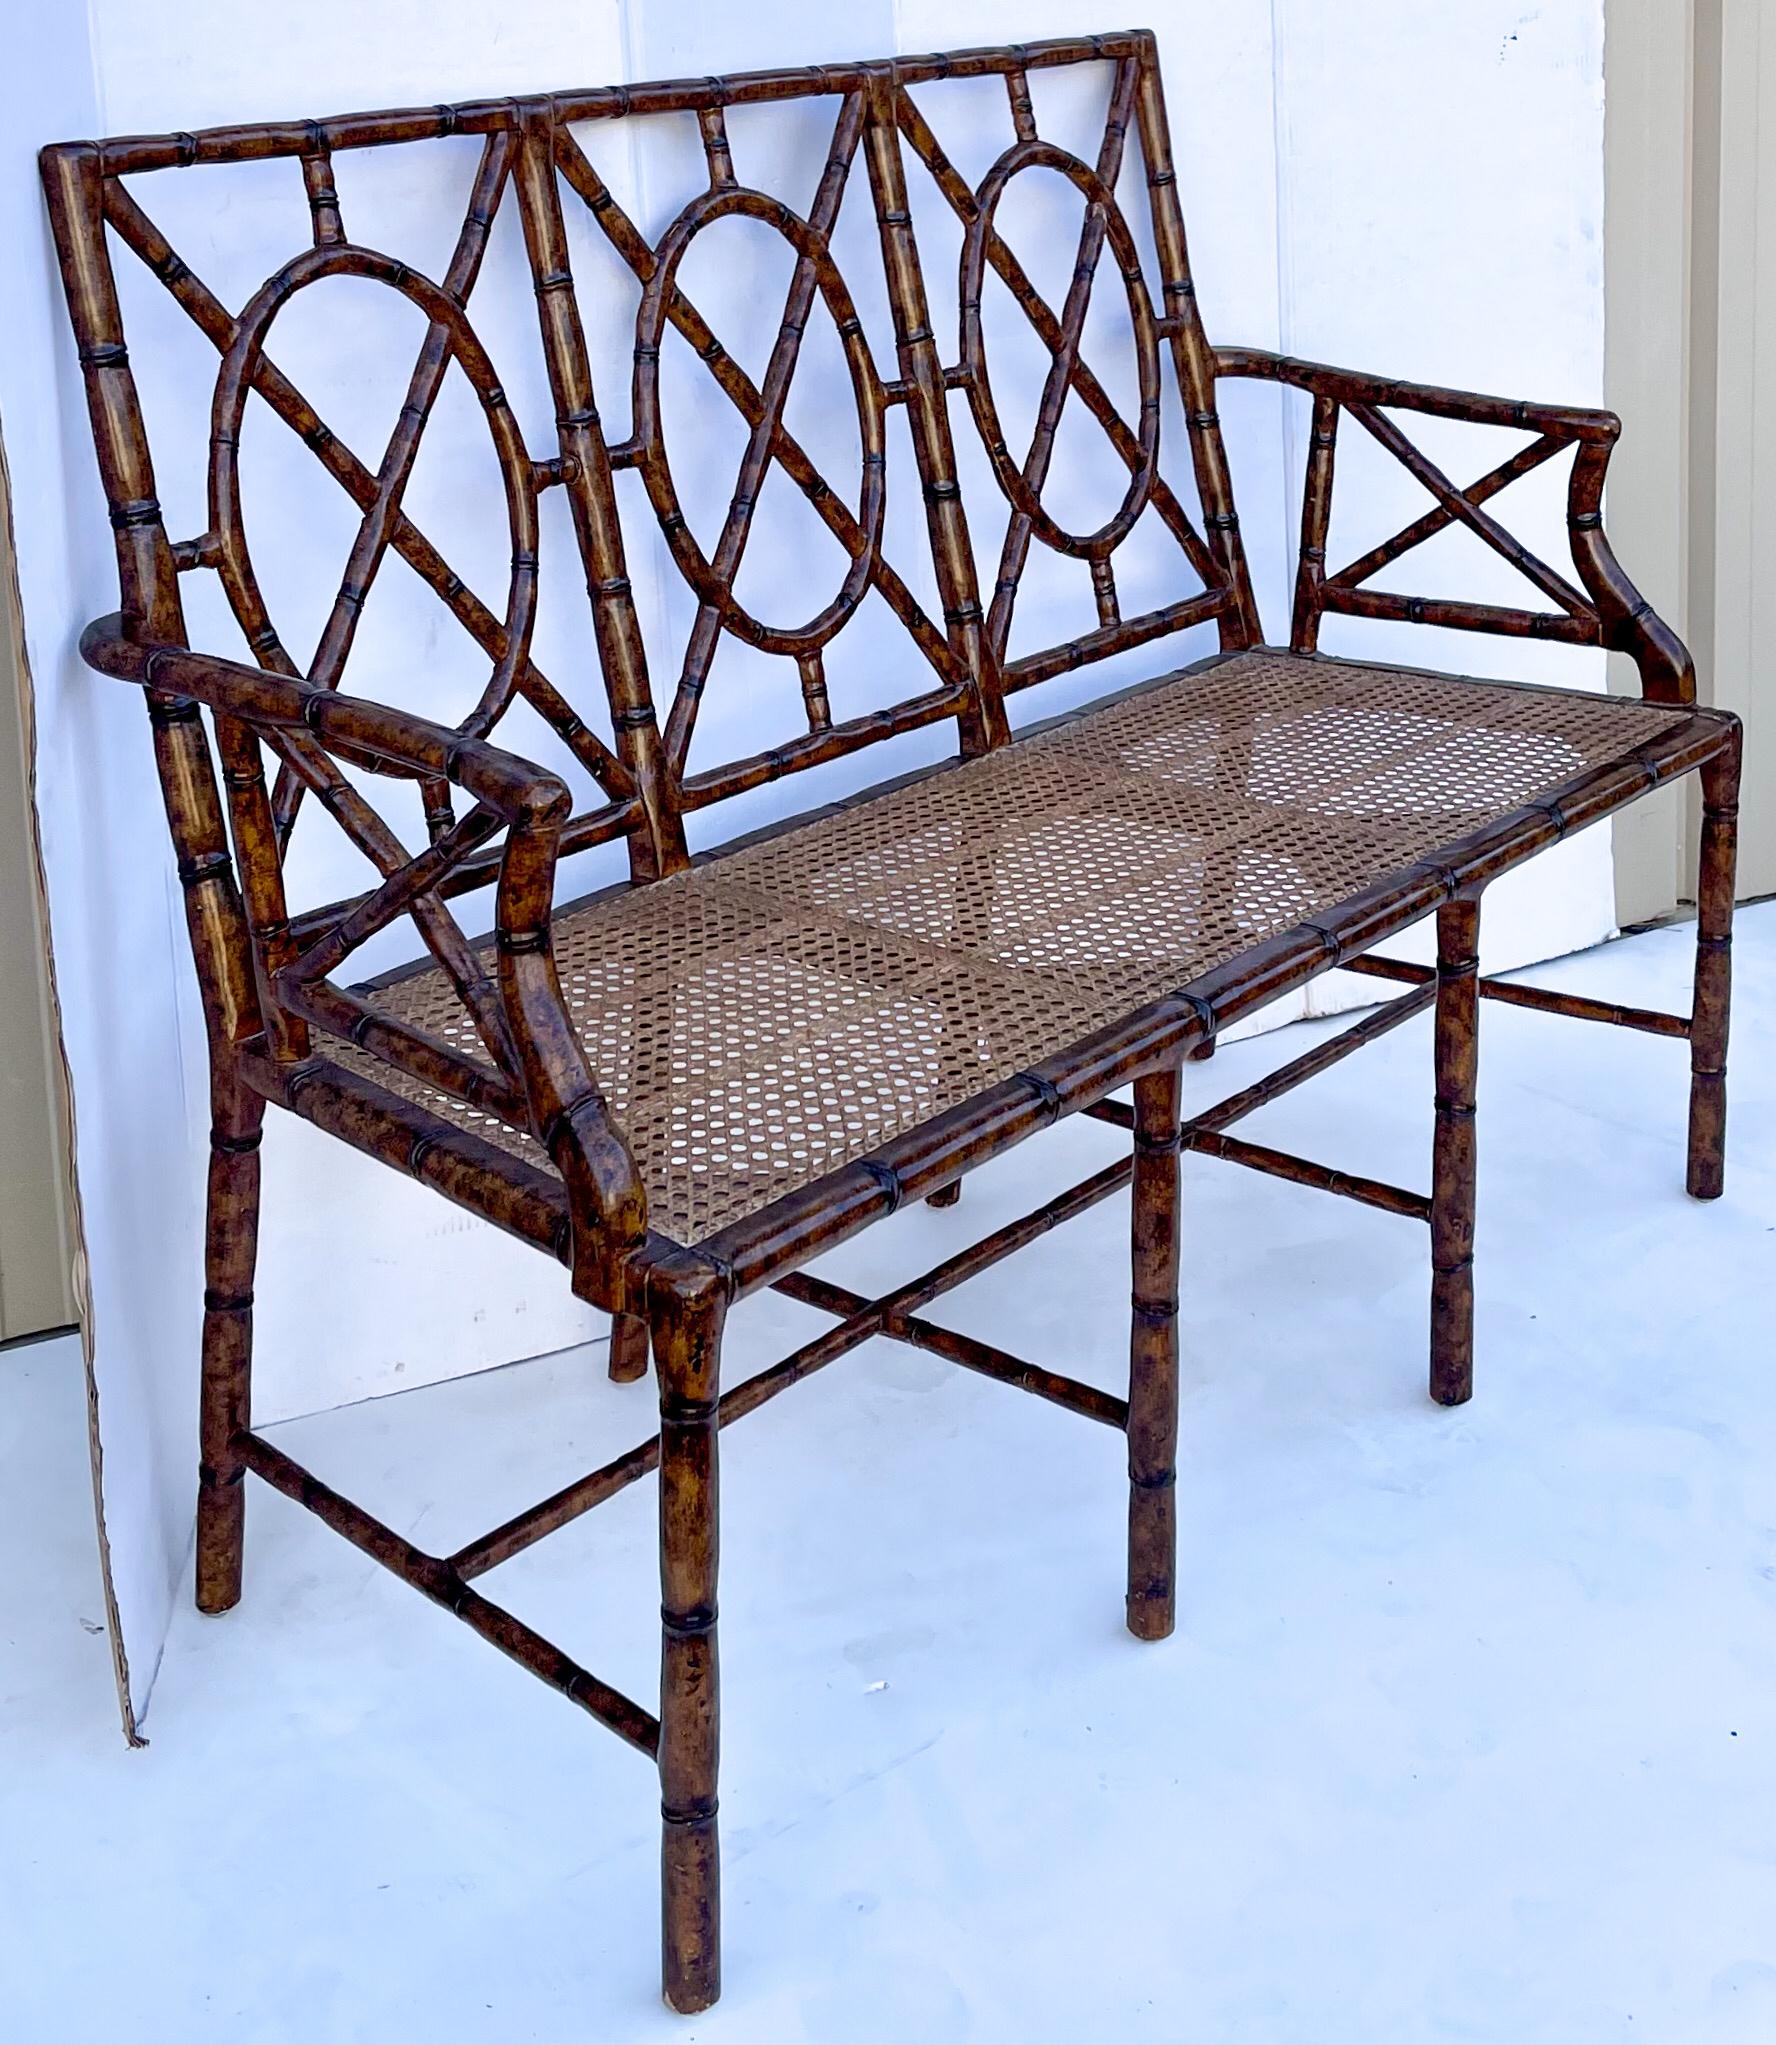 American Regency Style Faux Bamboo Bench or Settee with a Faux Tortoise Finish